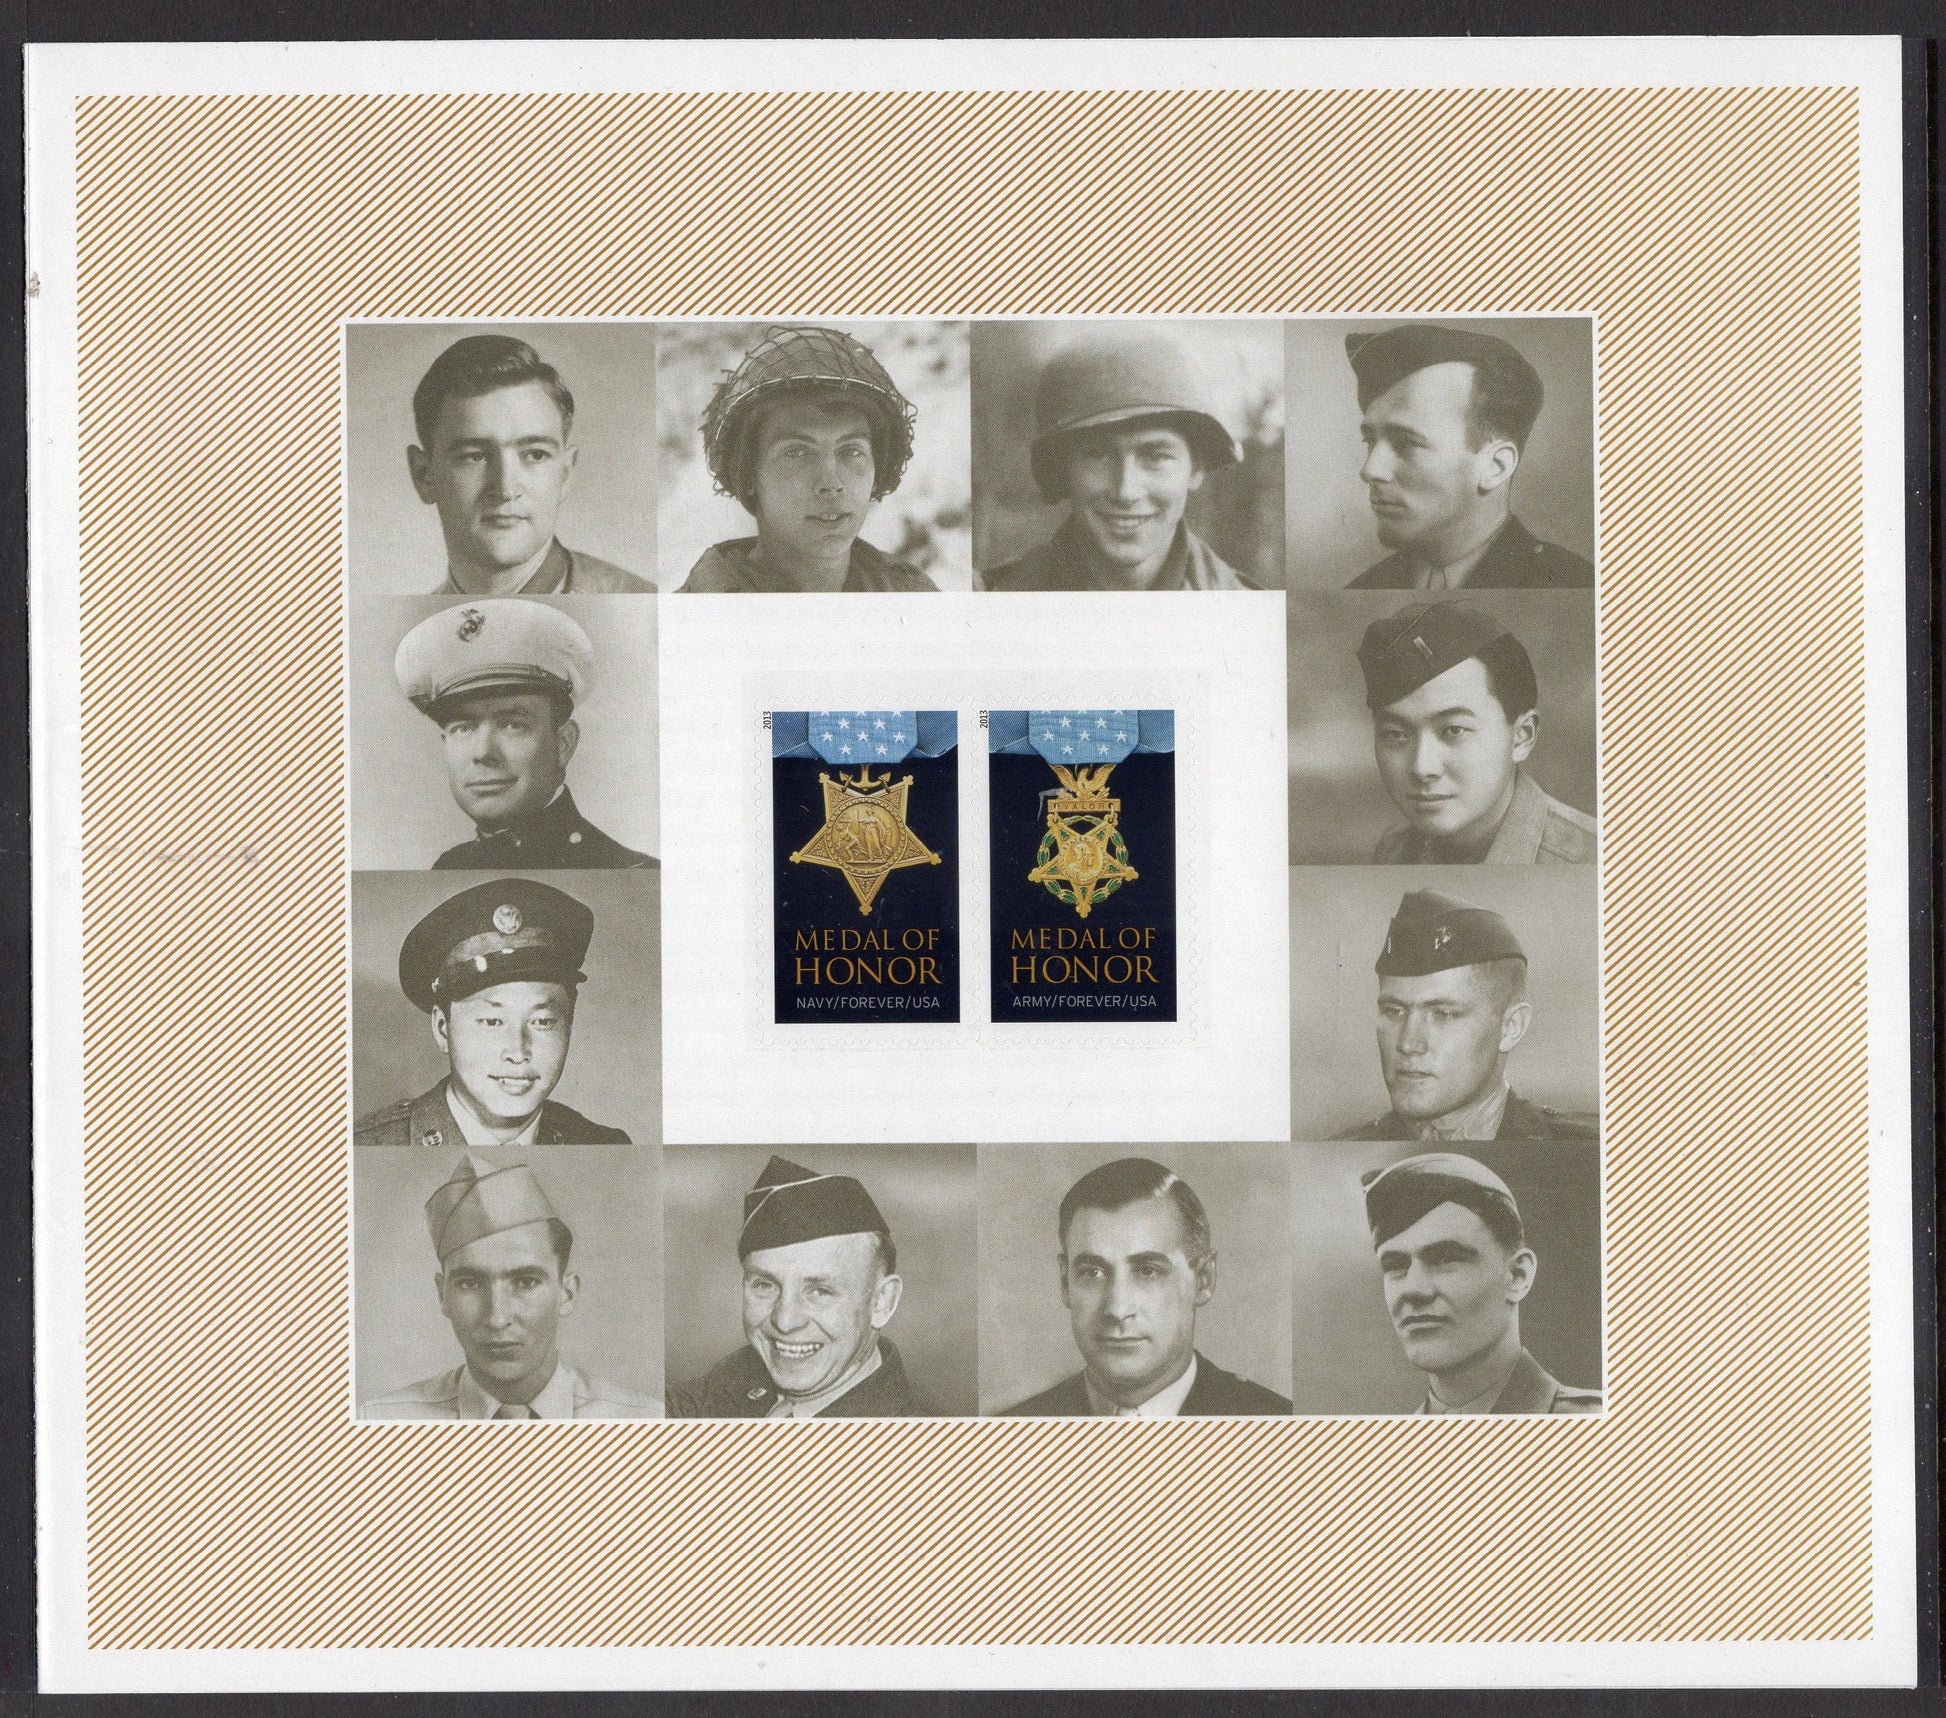 MEDAL of HONOR WORLD War 2 Recipients Post Office Issued in Folio w/20 Stamps, Names - 4 scans - Issued in 2013 - s4922F-